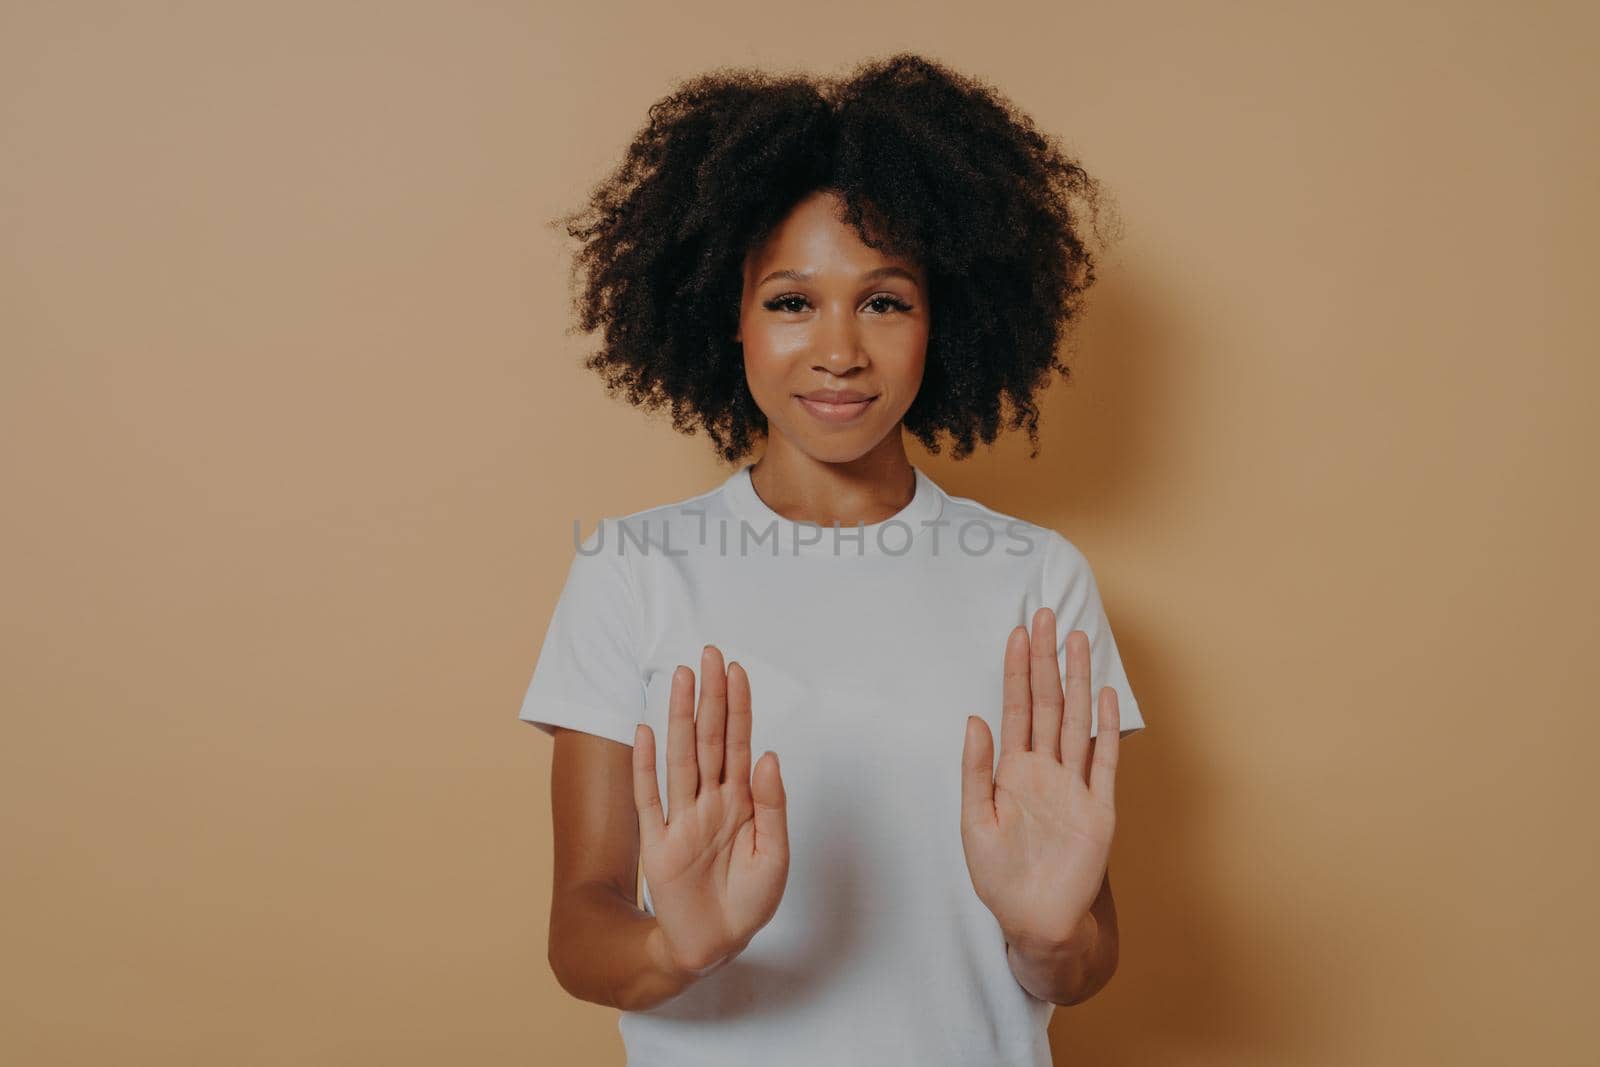 Young smiling mixed race woman with curly hairstyle raising palms in stop or prohibition gesture by vkstock